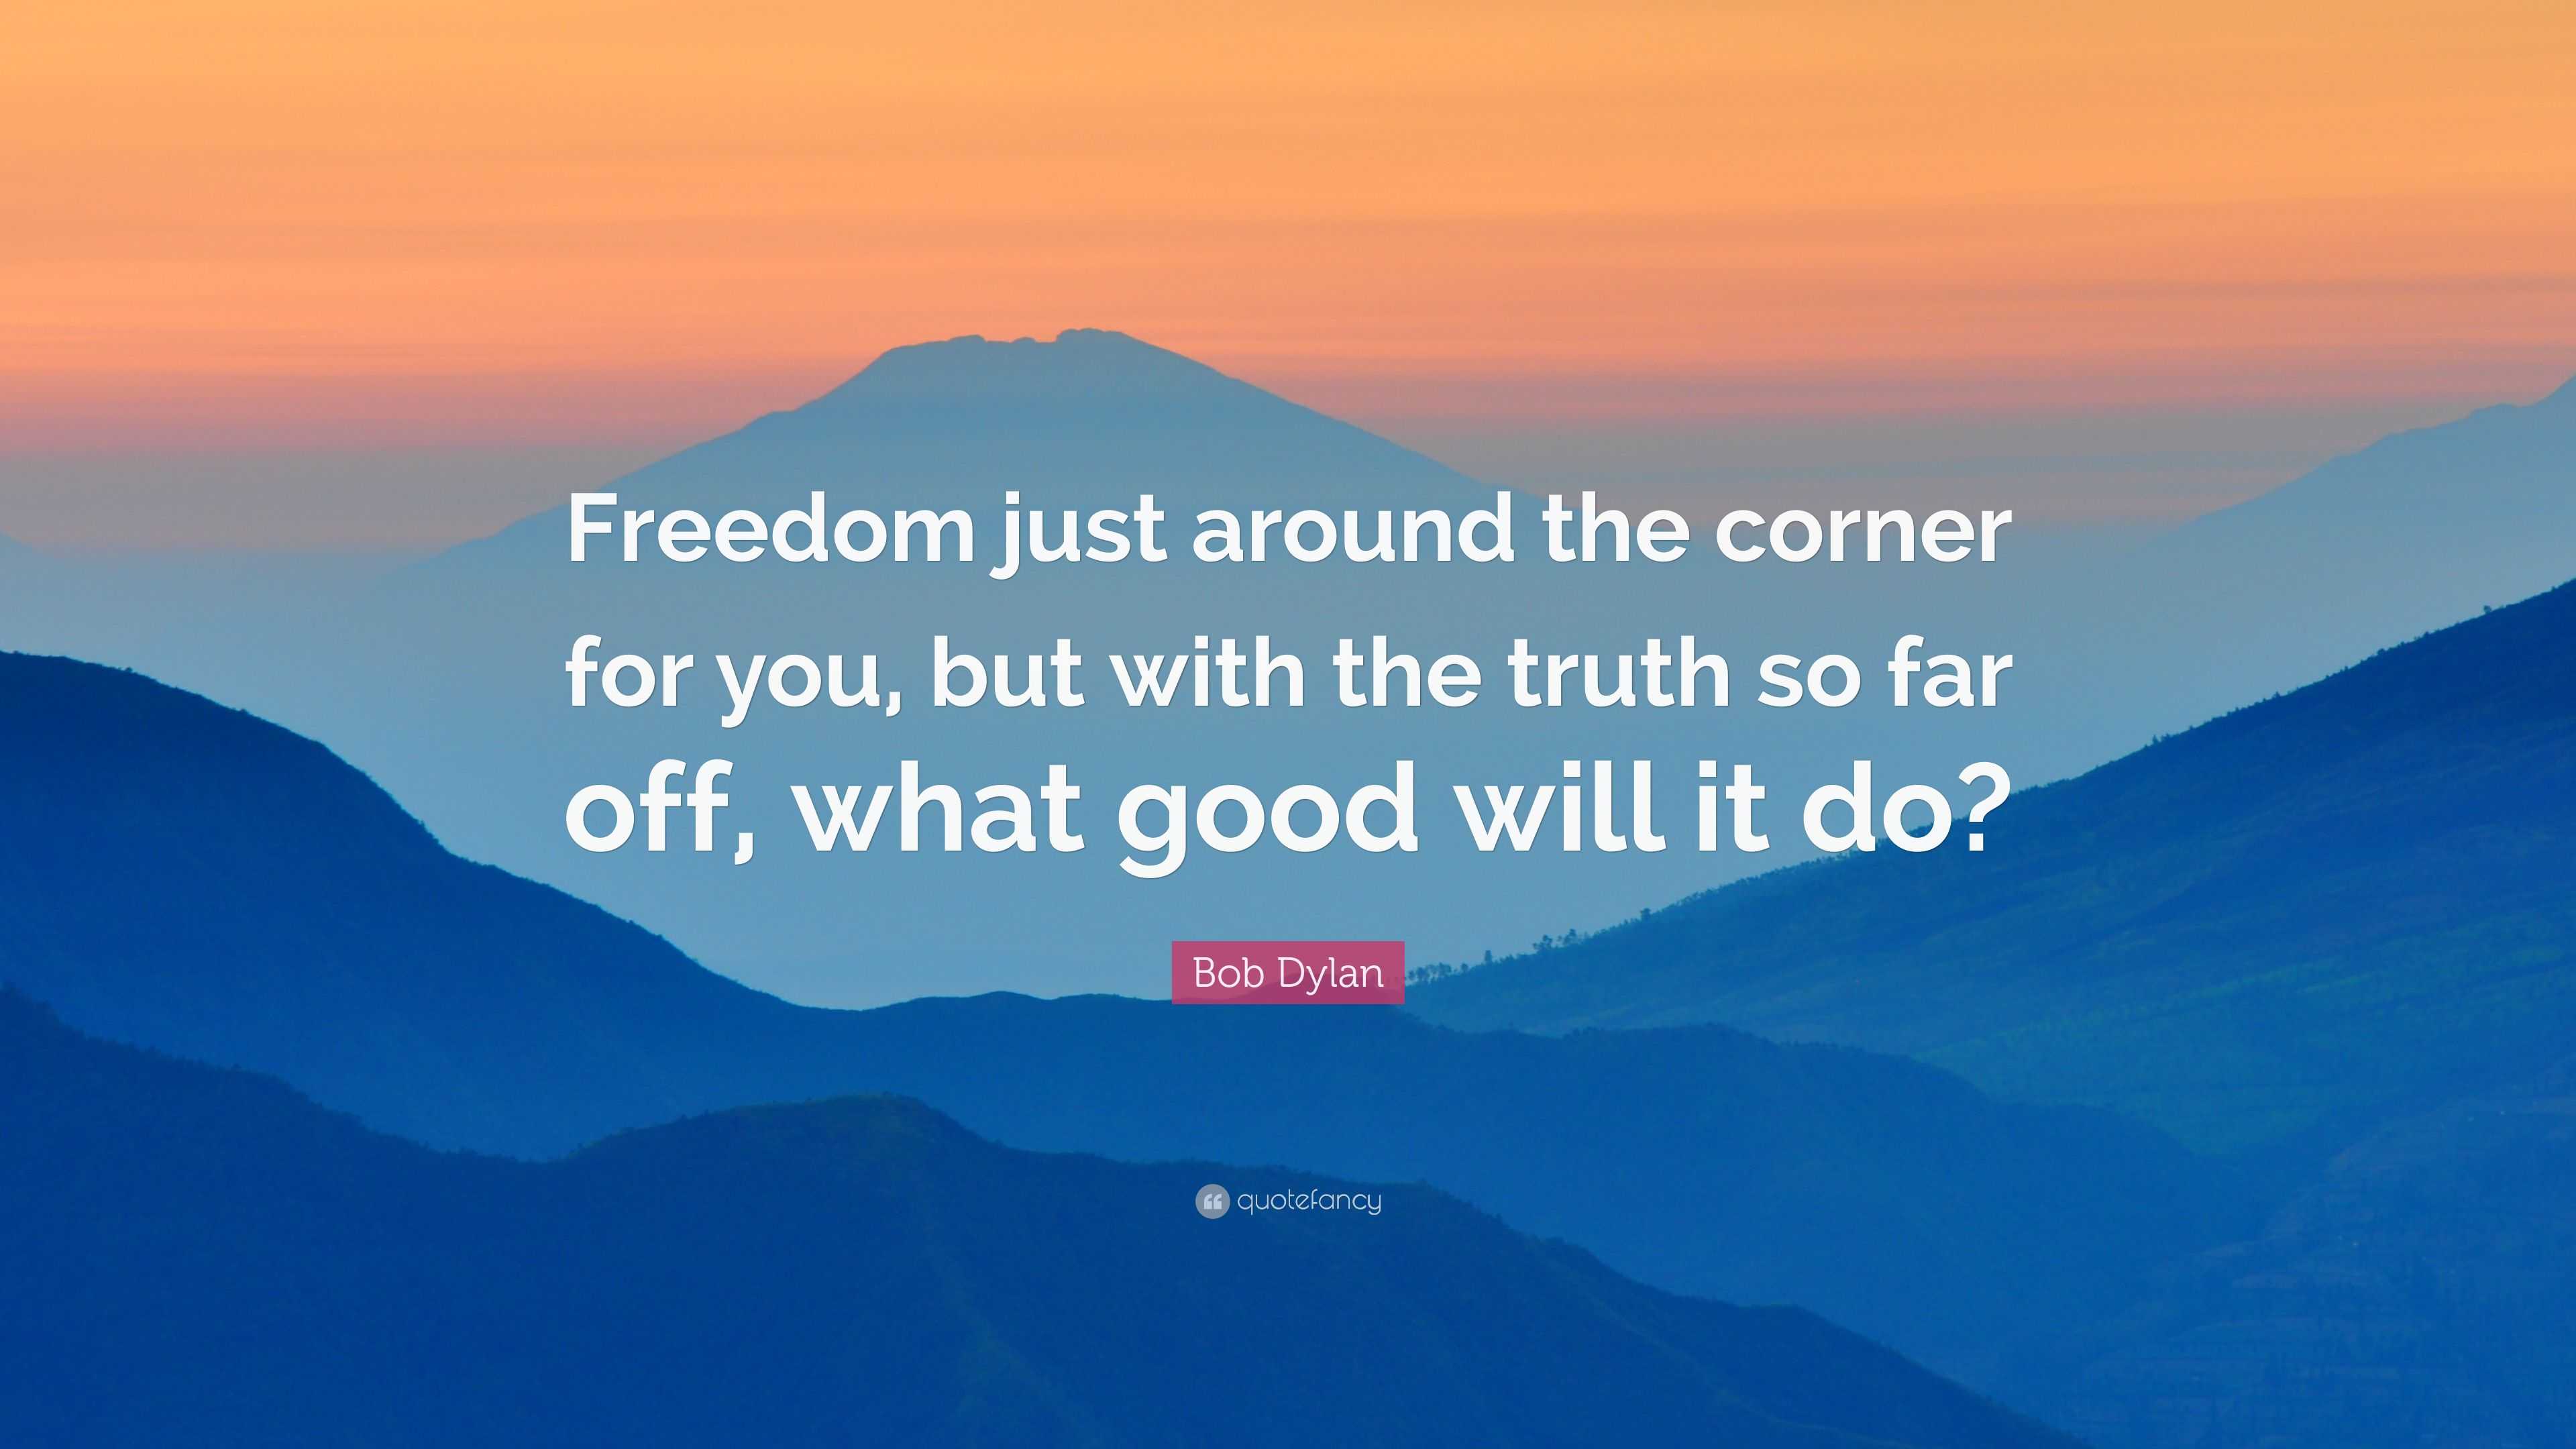 Bob Dylan Quote: “Freedom just around the corner for you, but with the